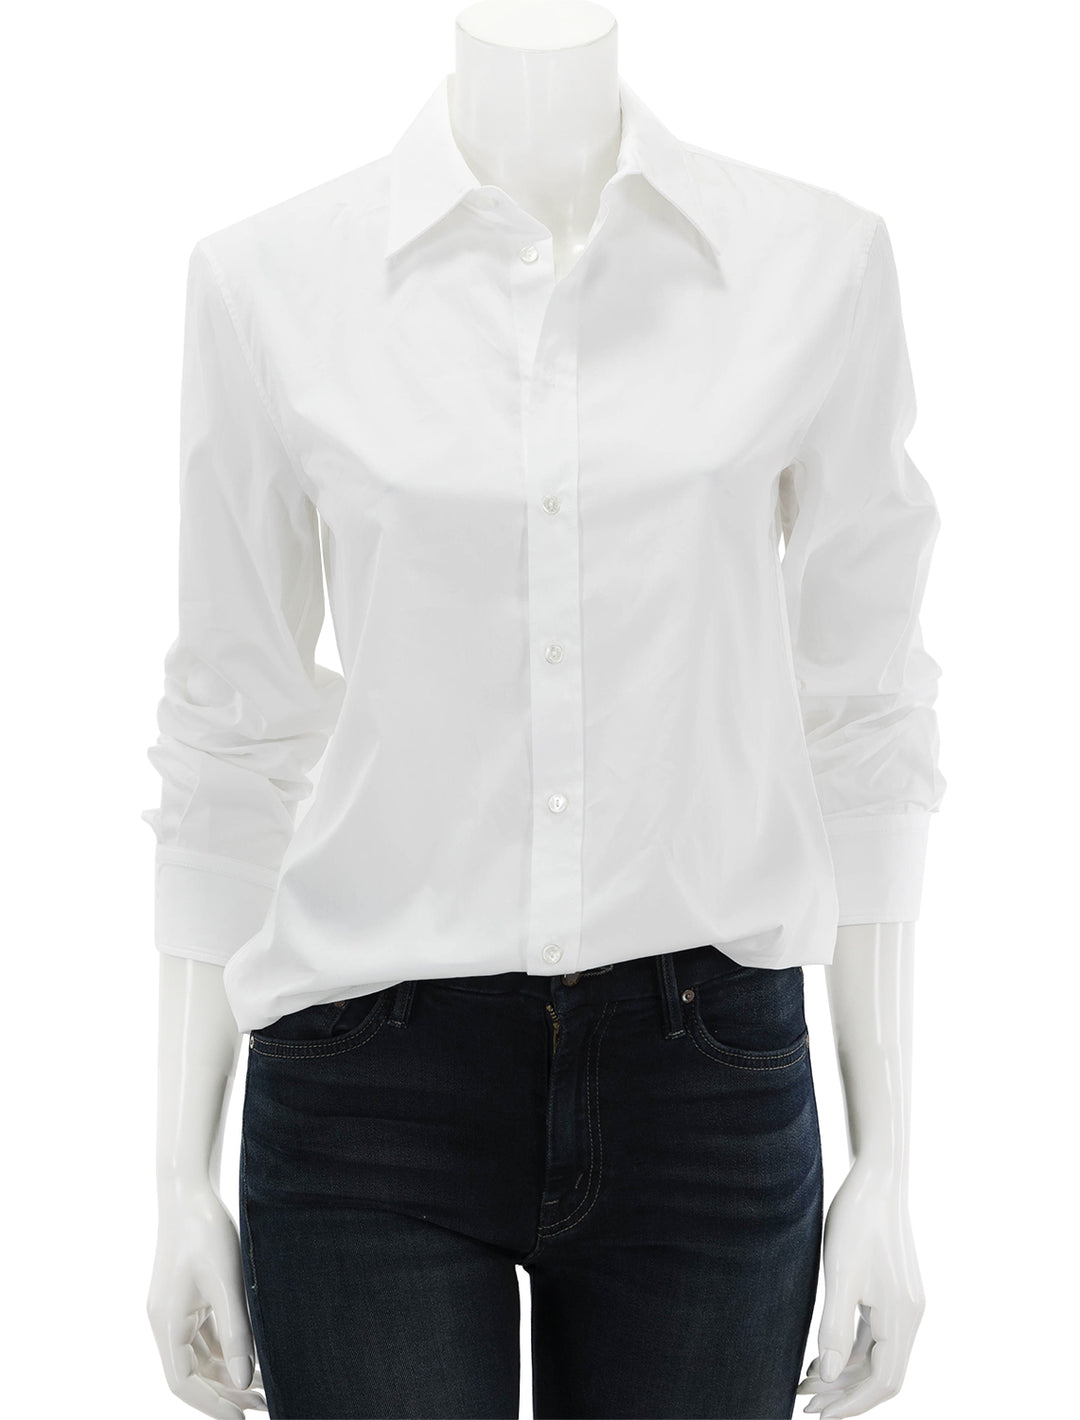 Front view of Nili Lotan's raphael classic shirt in white.